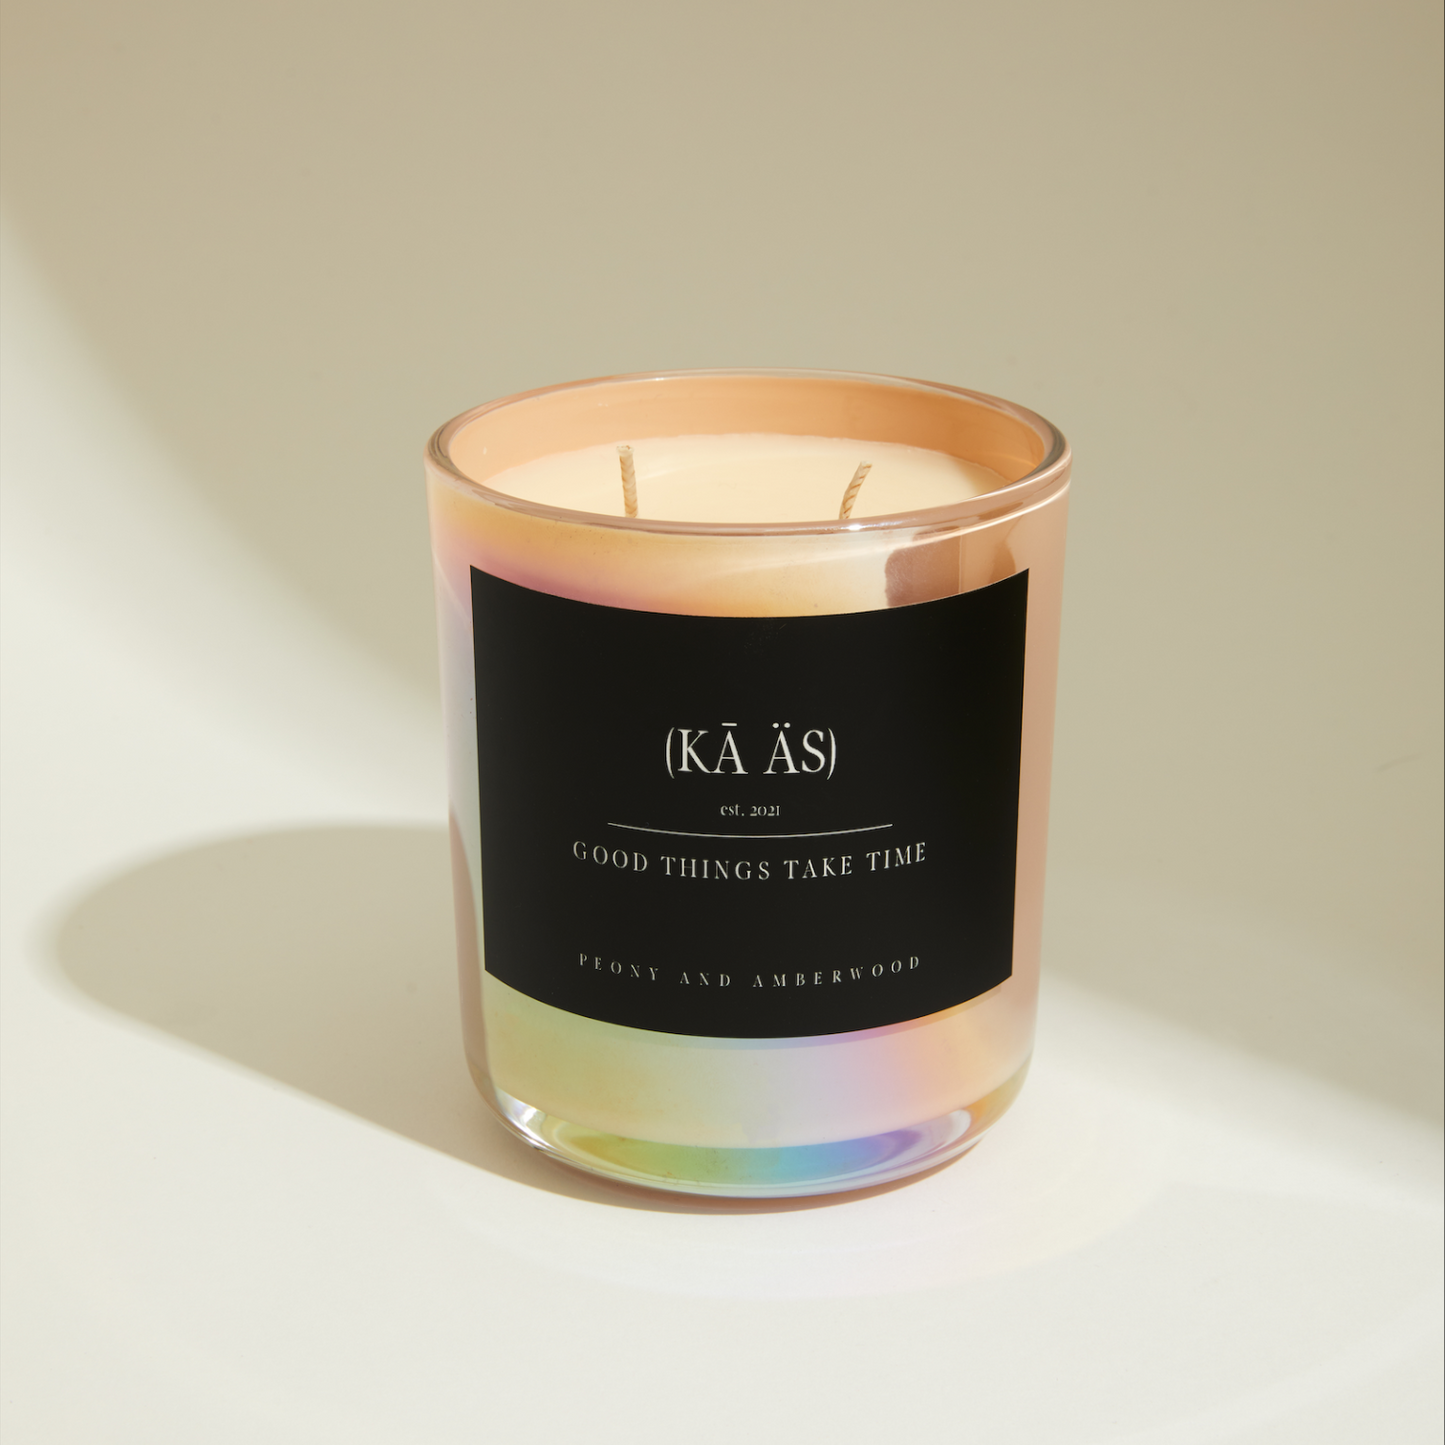 peony and amberwood scented candle, iridescent pink vessel.